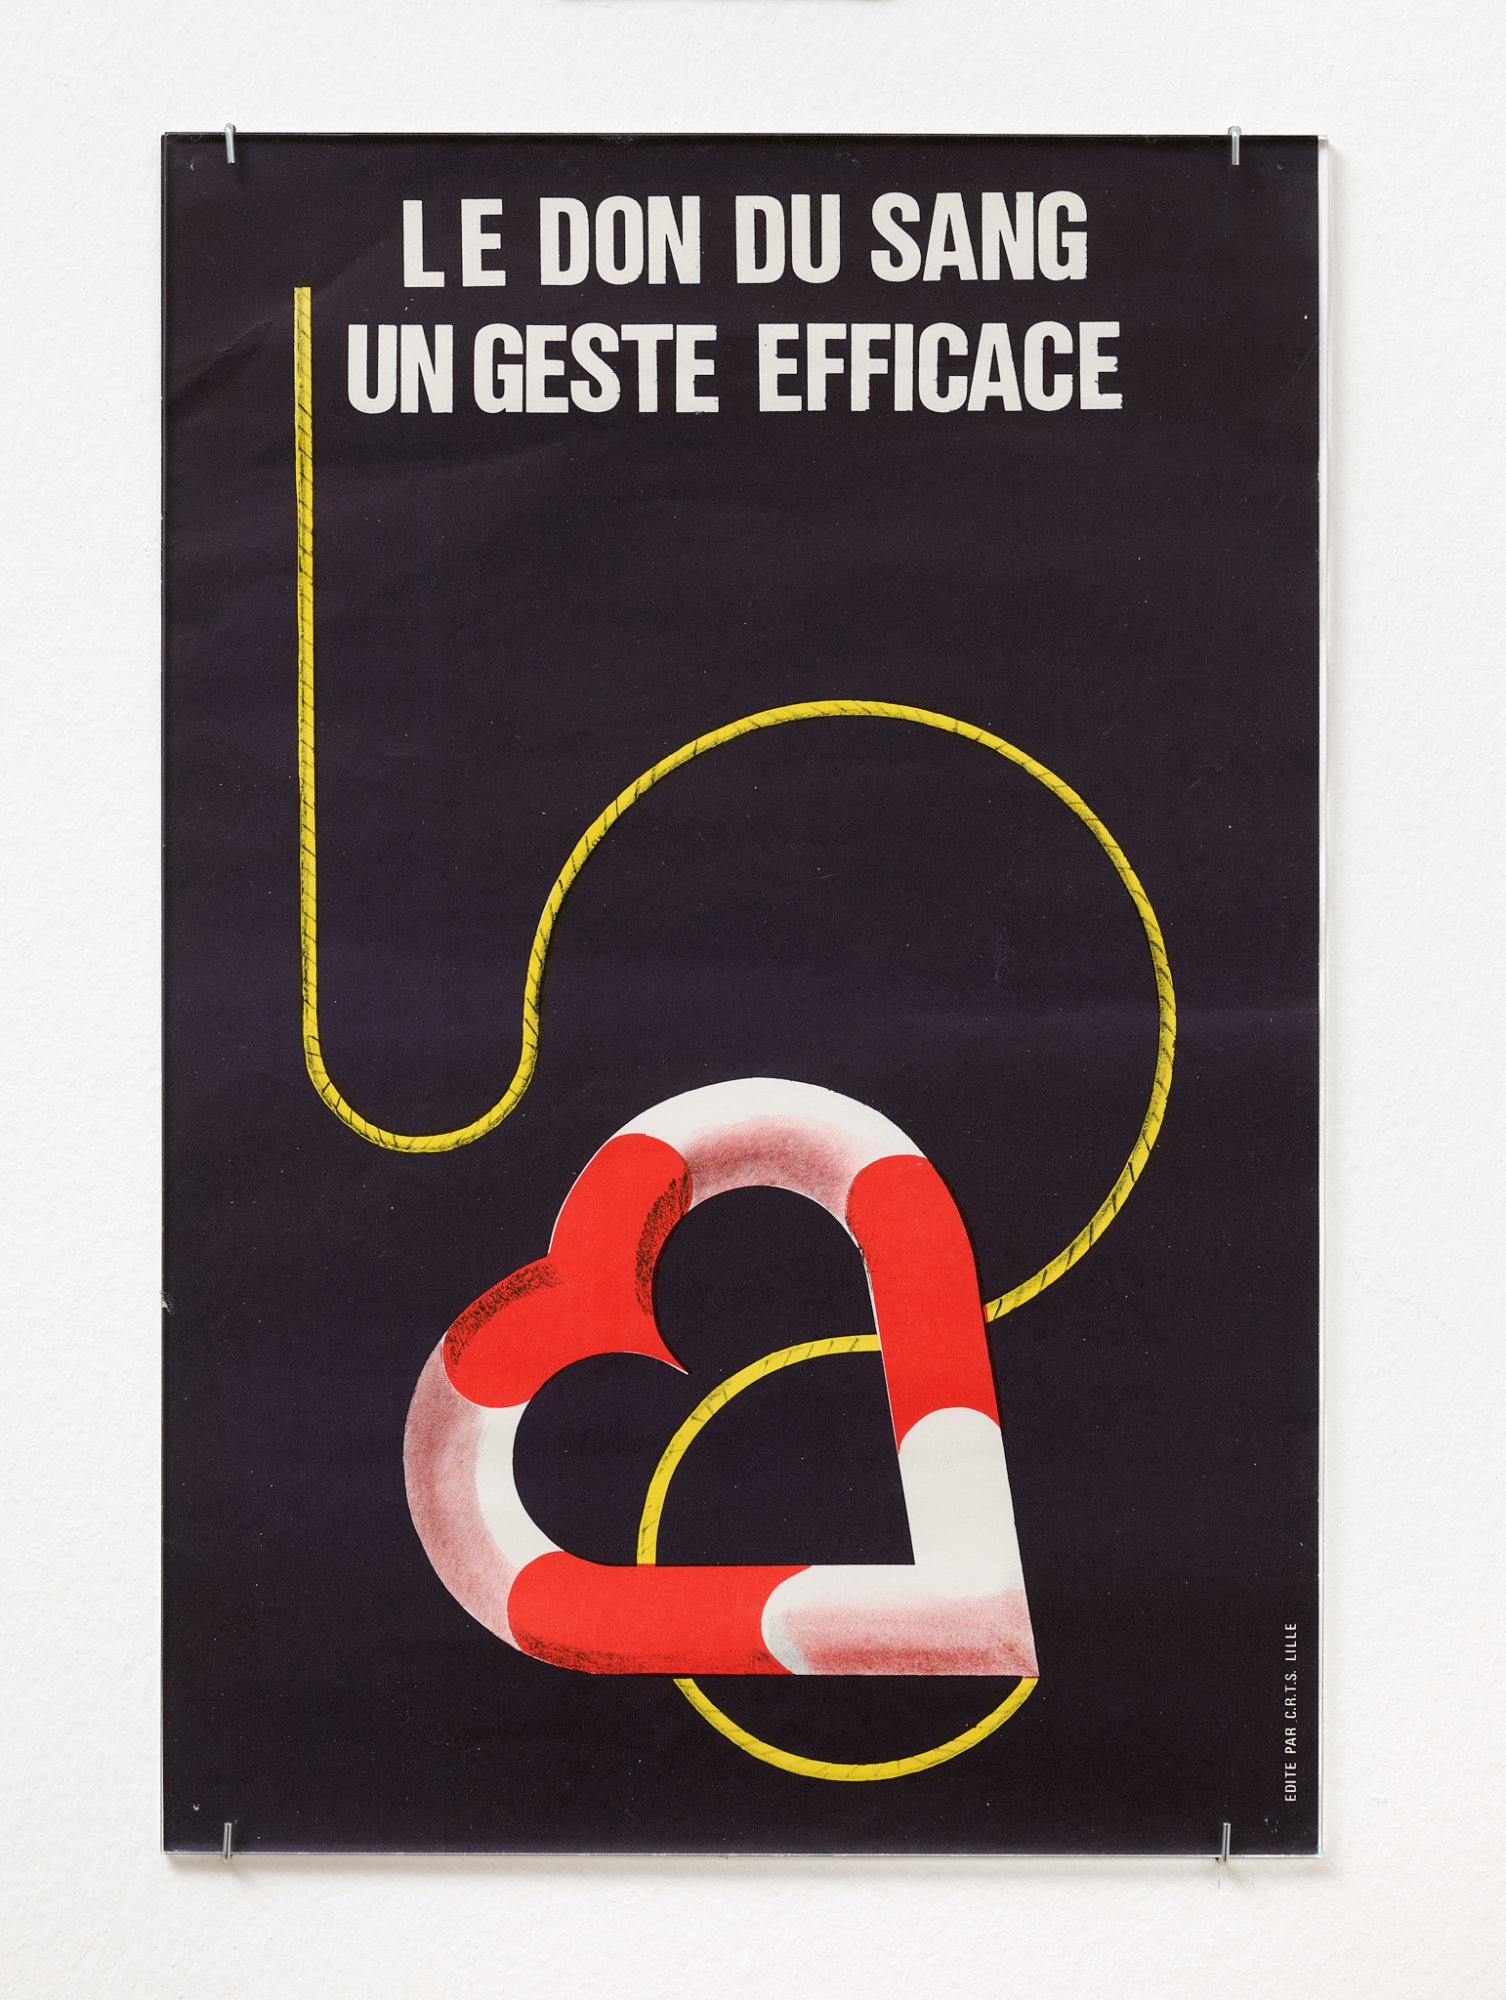 André Romão, like a river / como um rio, 2023. Posters (United States, France, Hungary and Germany, 1940s-1990s). Variable dimensions. Unique
